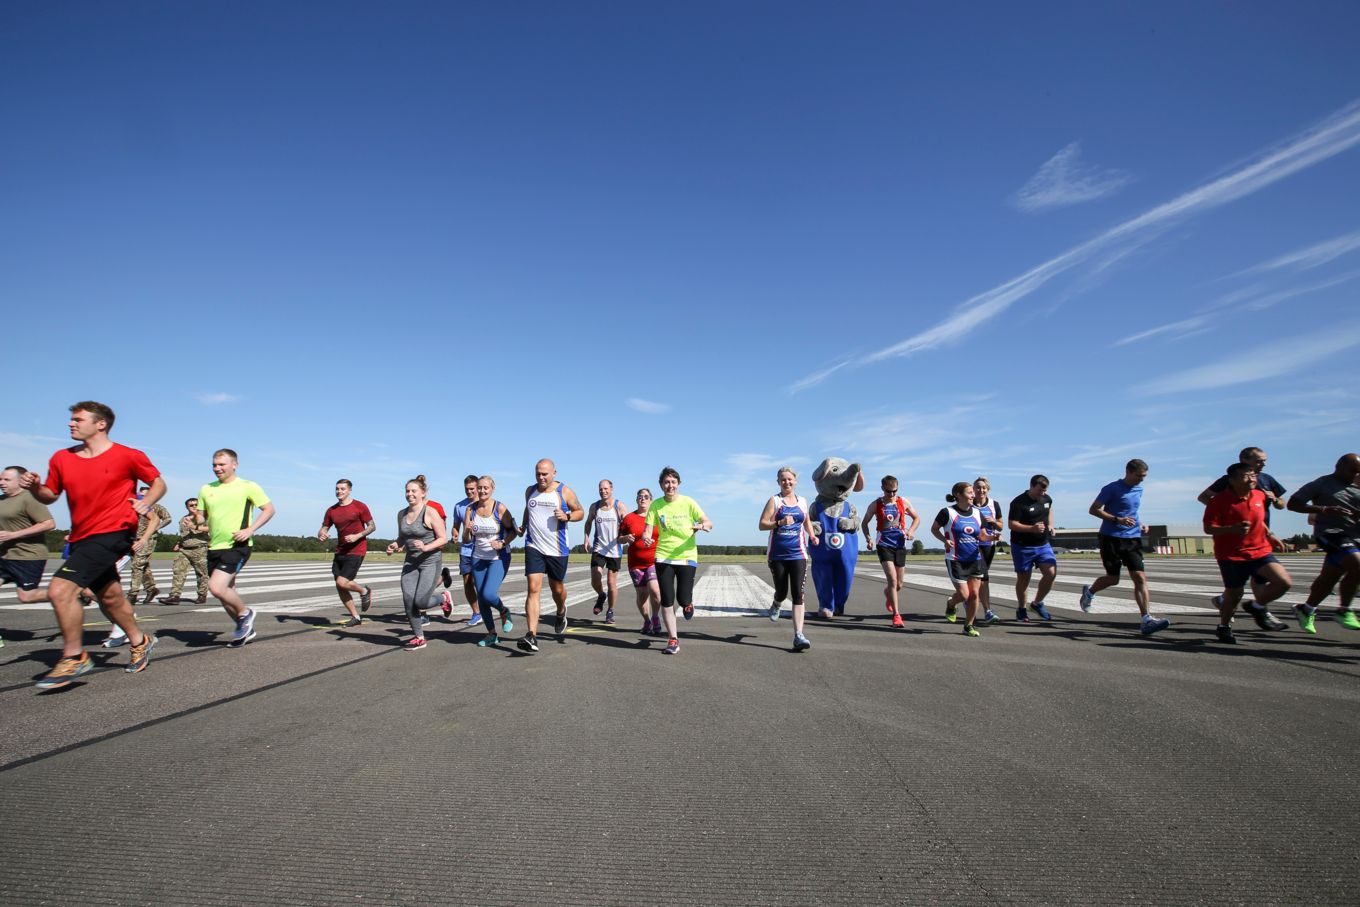 The runners set off along the runway.